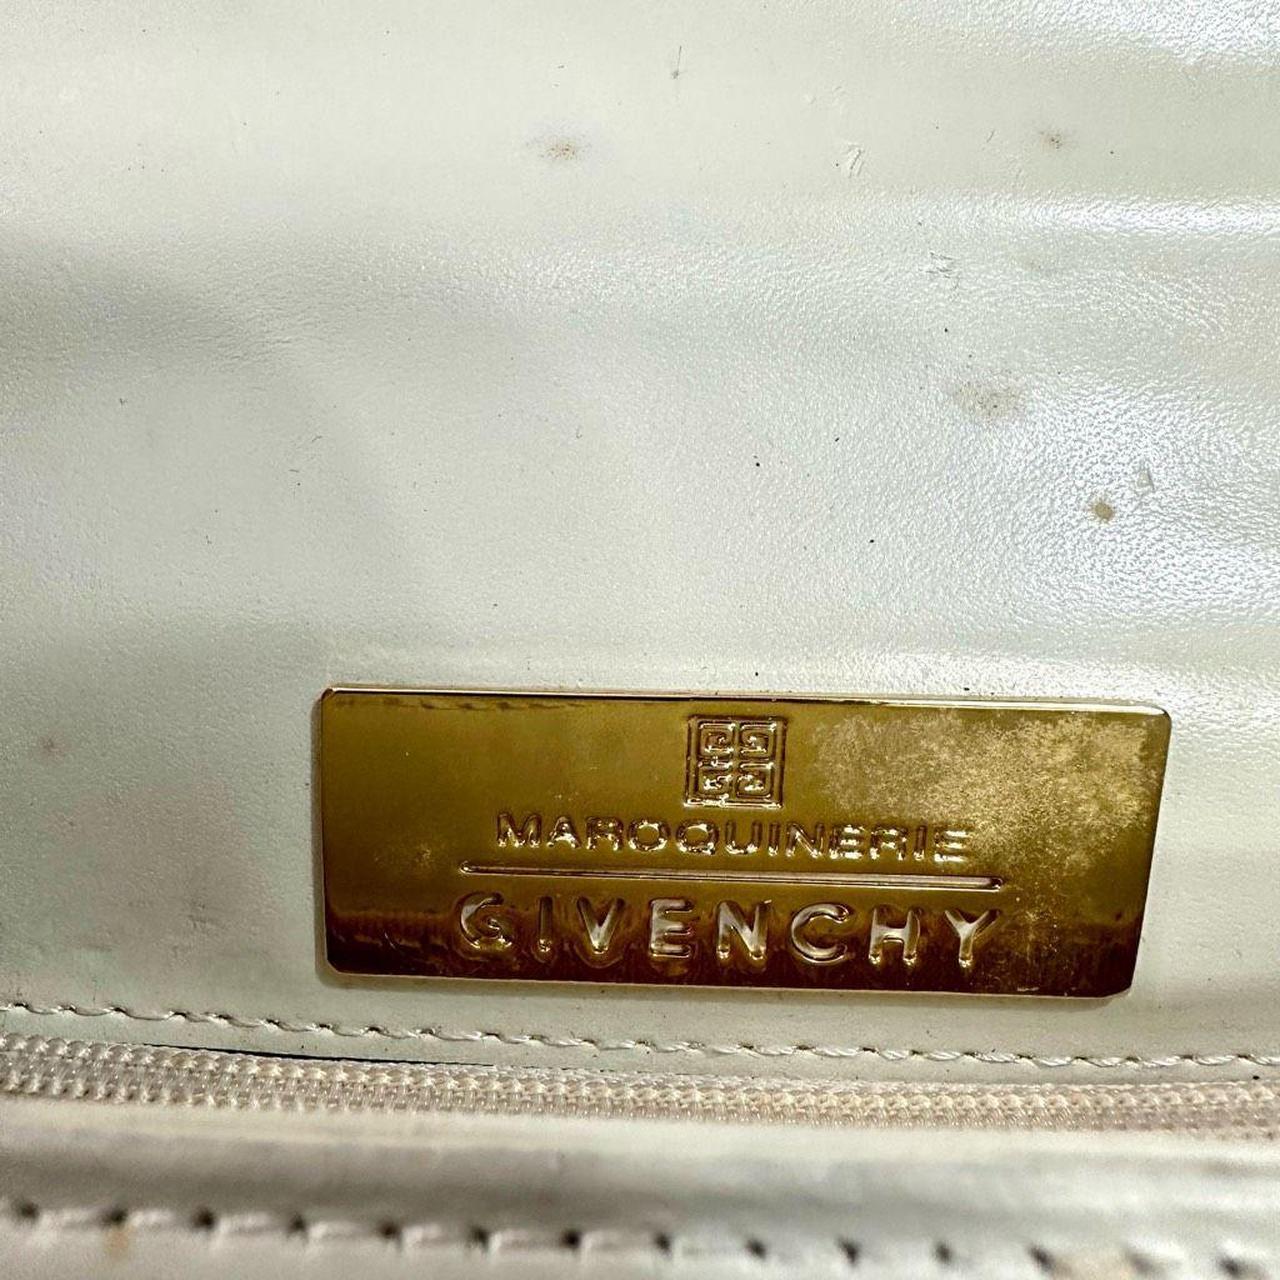 classic givenchy bag